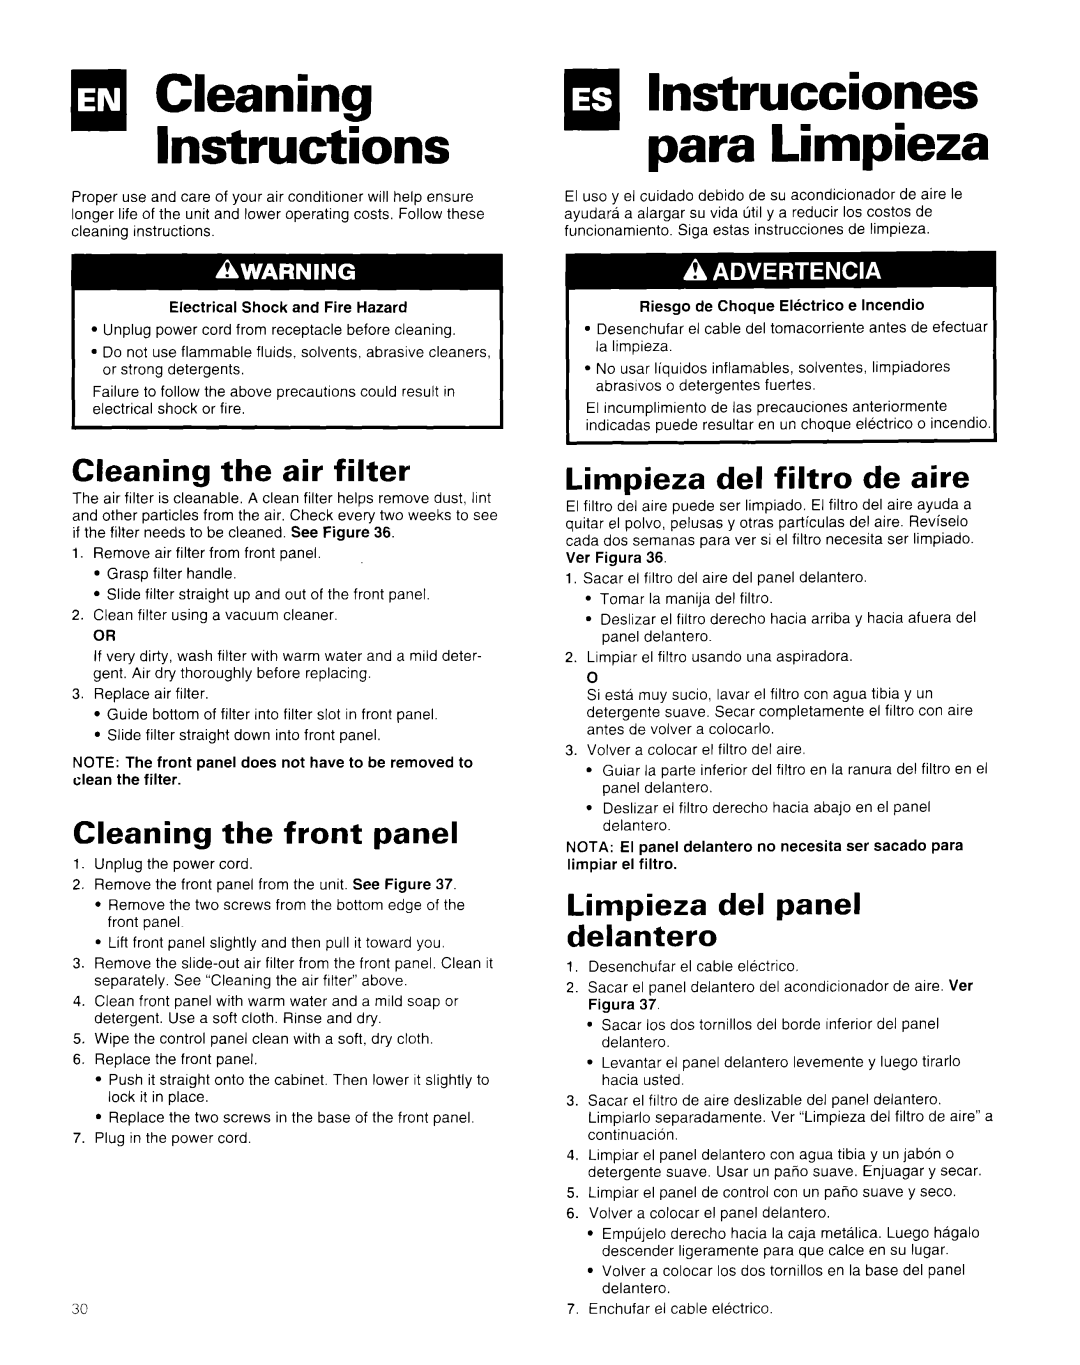 Whirlpool AR1800XA0 manual q lnstrucciones para Limpieza, qc’eaning Instructions, Cleaning the air filter 